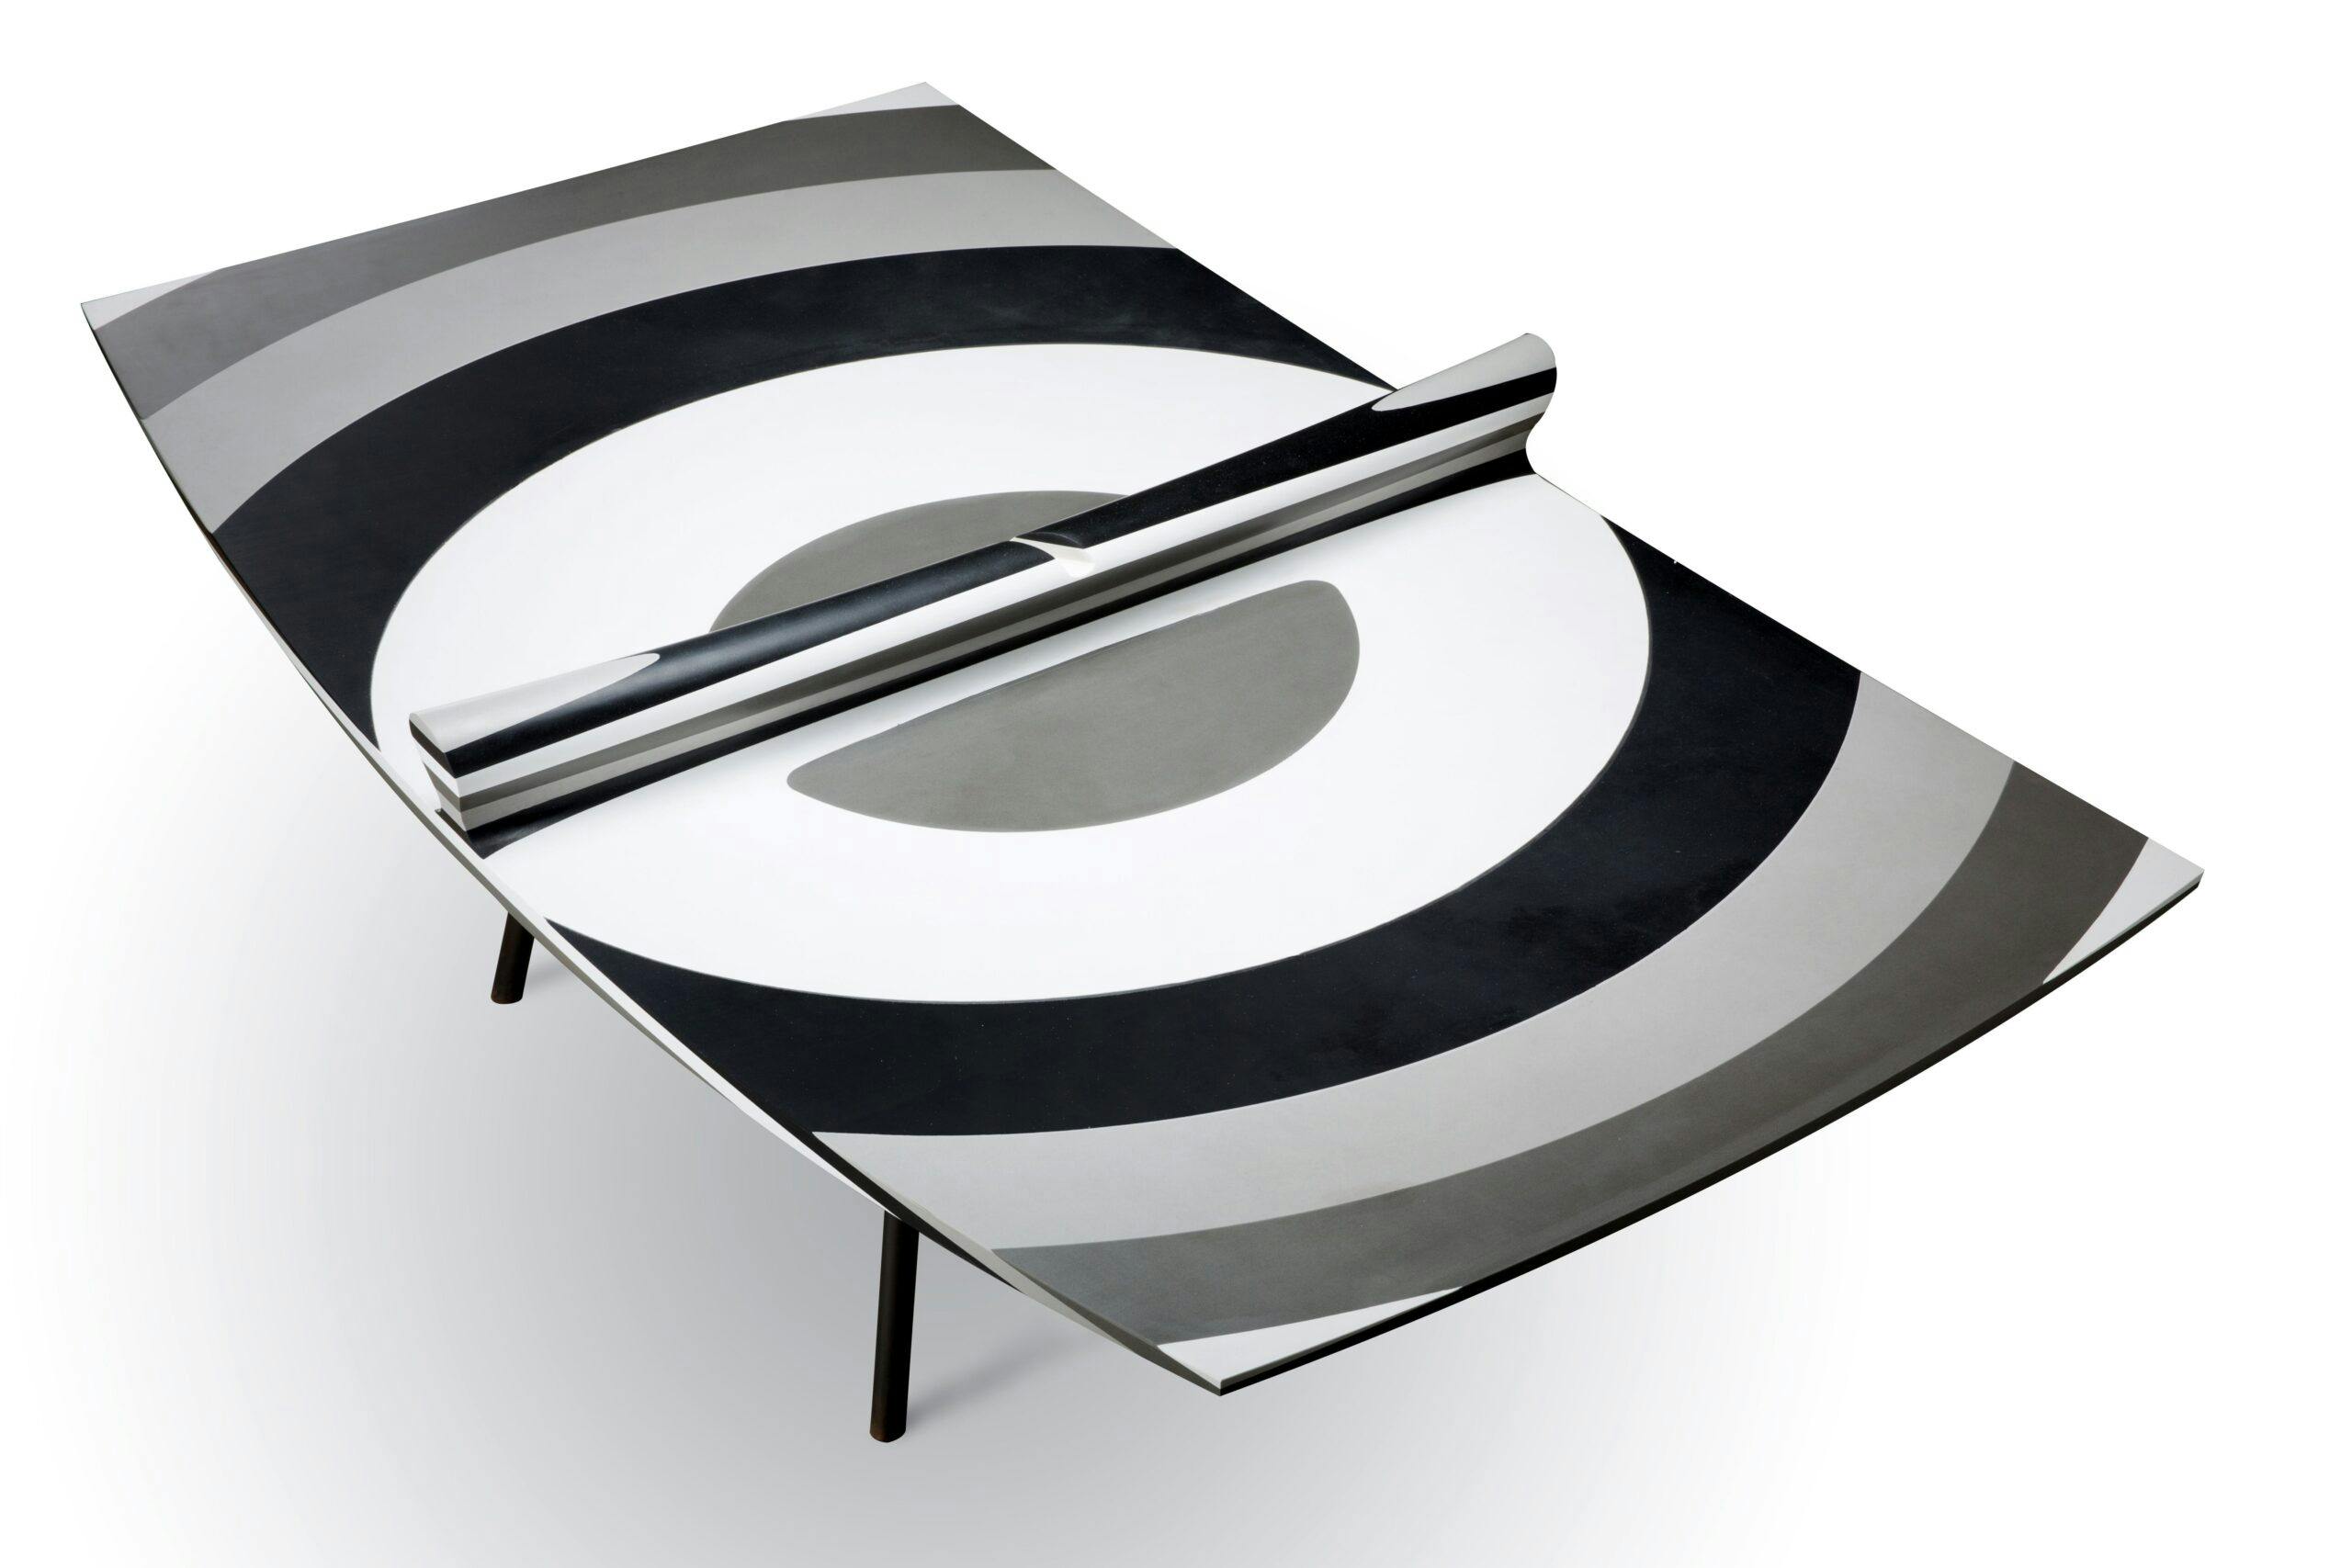 10 Layers Silestone ping pong table by Ron Arad